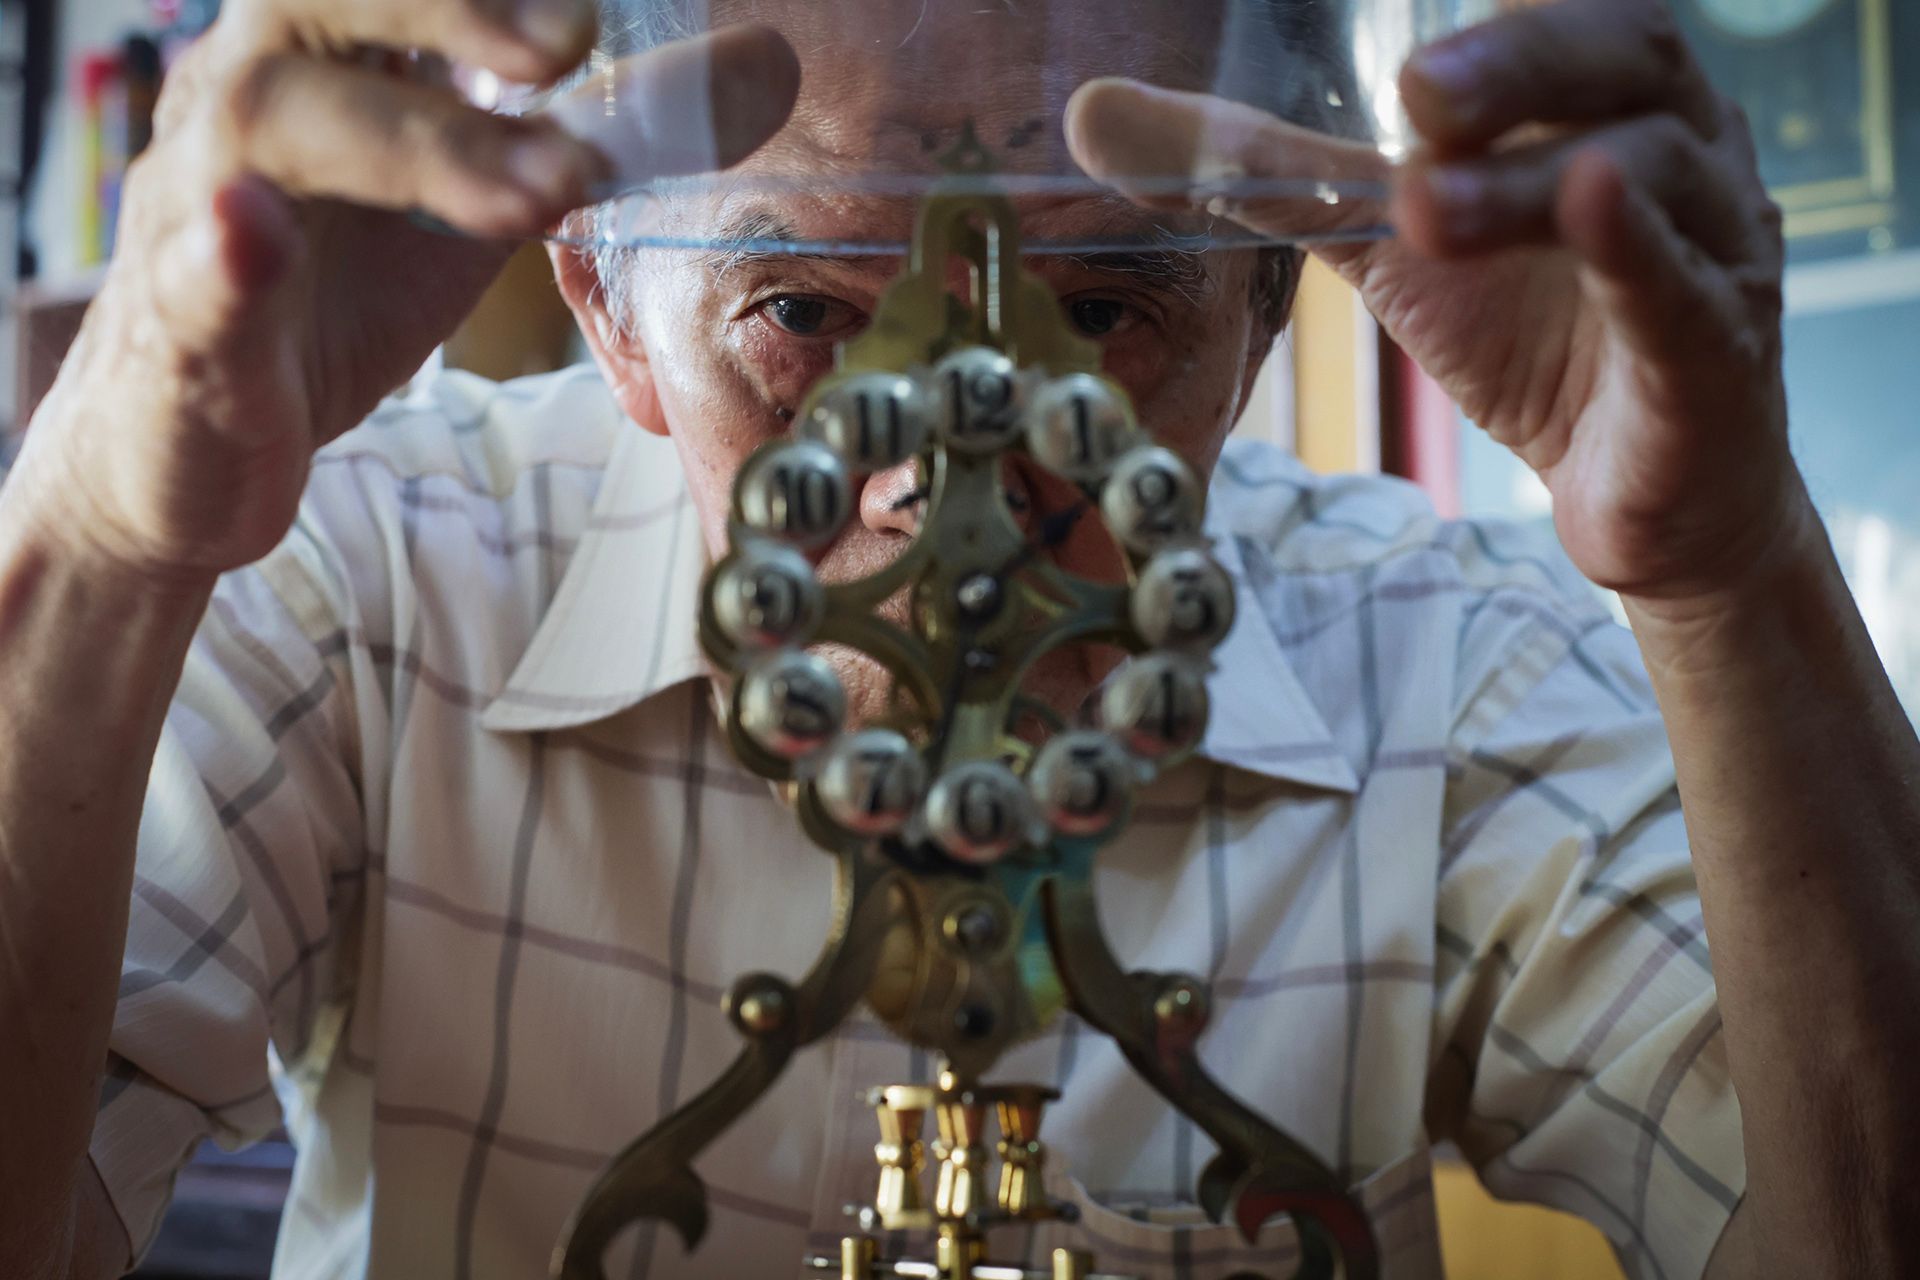 Mr Mun taking a closer look at his Gustav Becker 400-day skeleton clock. Like most 400-day clocks that have been properly serviced and adjusted, they do not require frequent attention, except to adjust the time once a while.